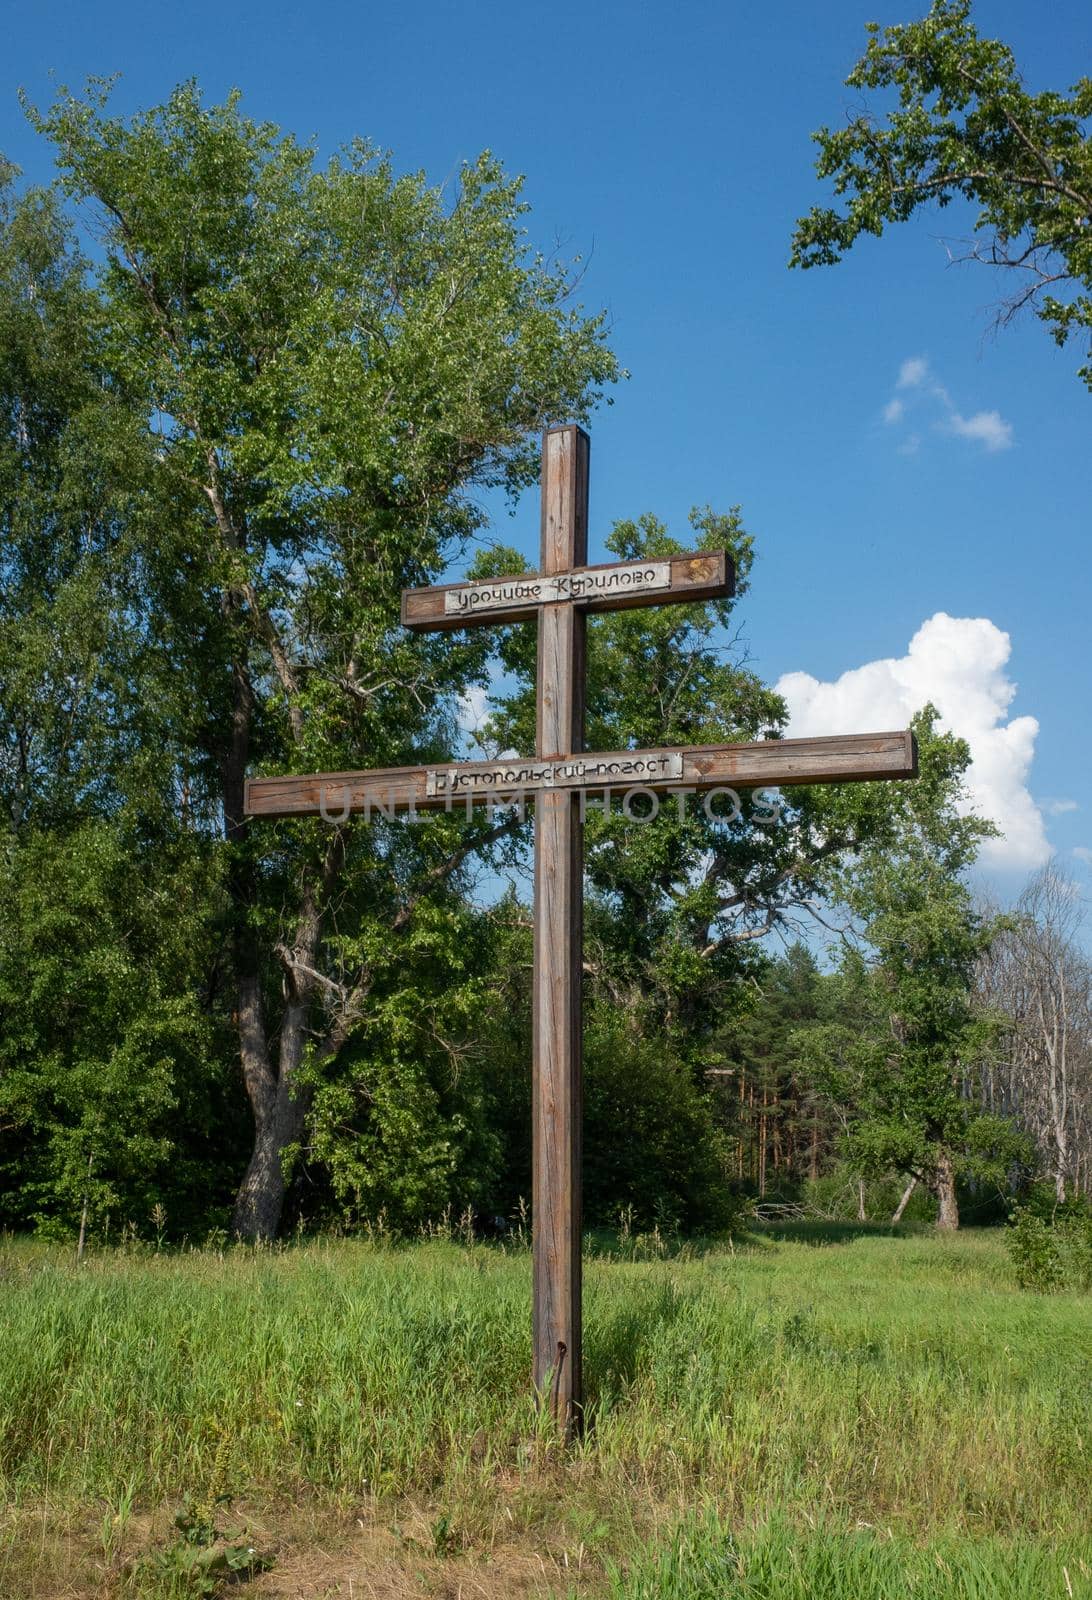 June 22, 2019, Moscow region, Russia Memorial cross at the site of the Pustopolsky Pogost in the Shatursky district of the Moscow region.